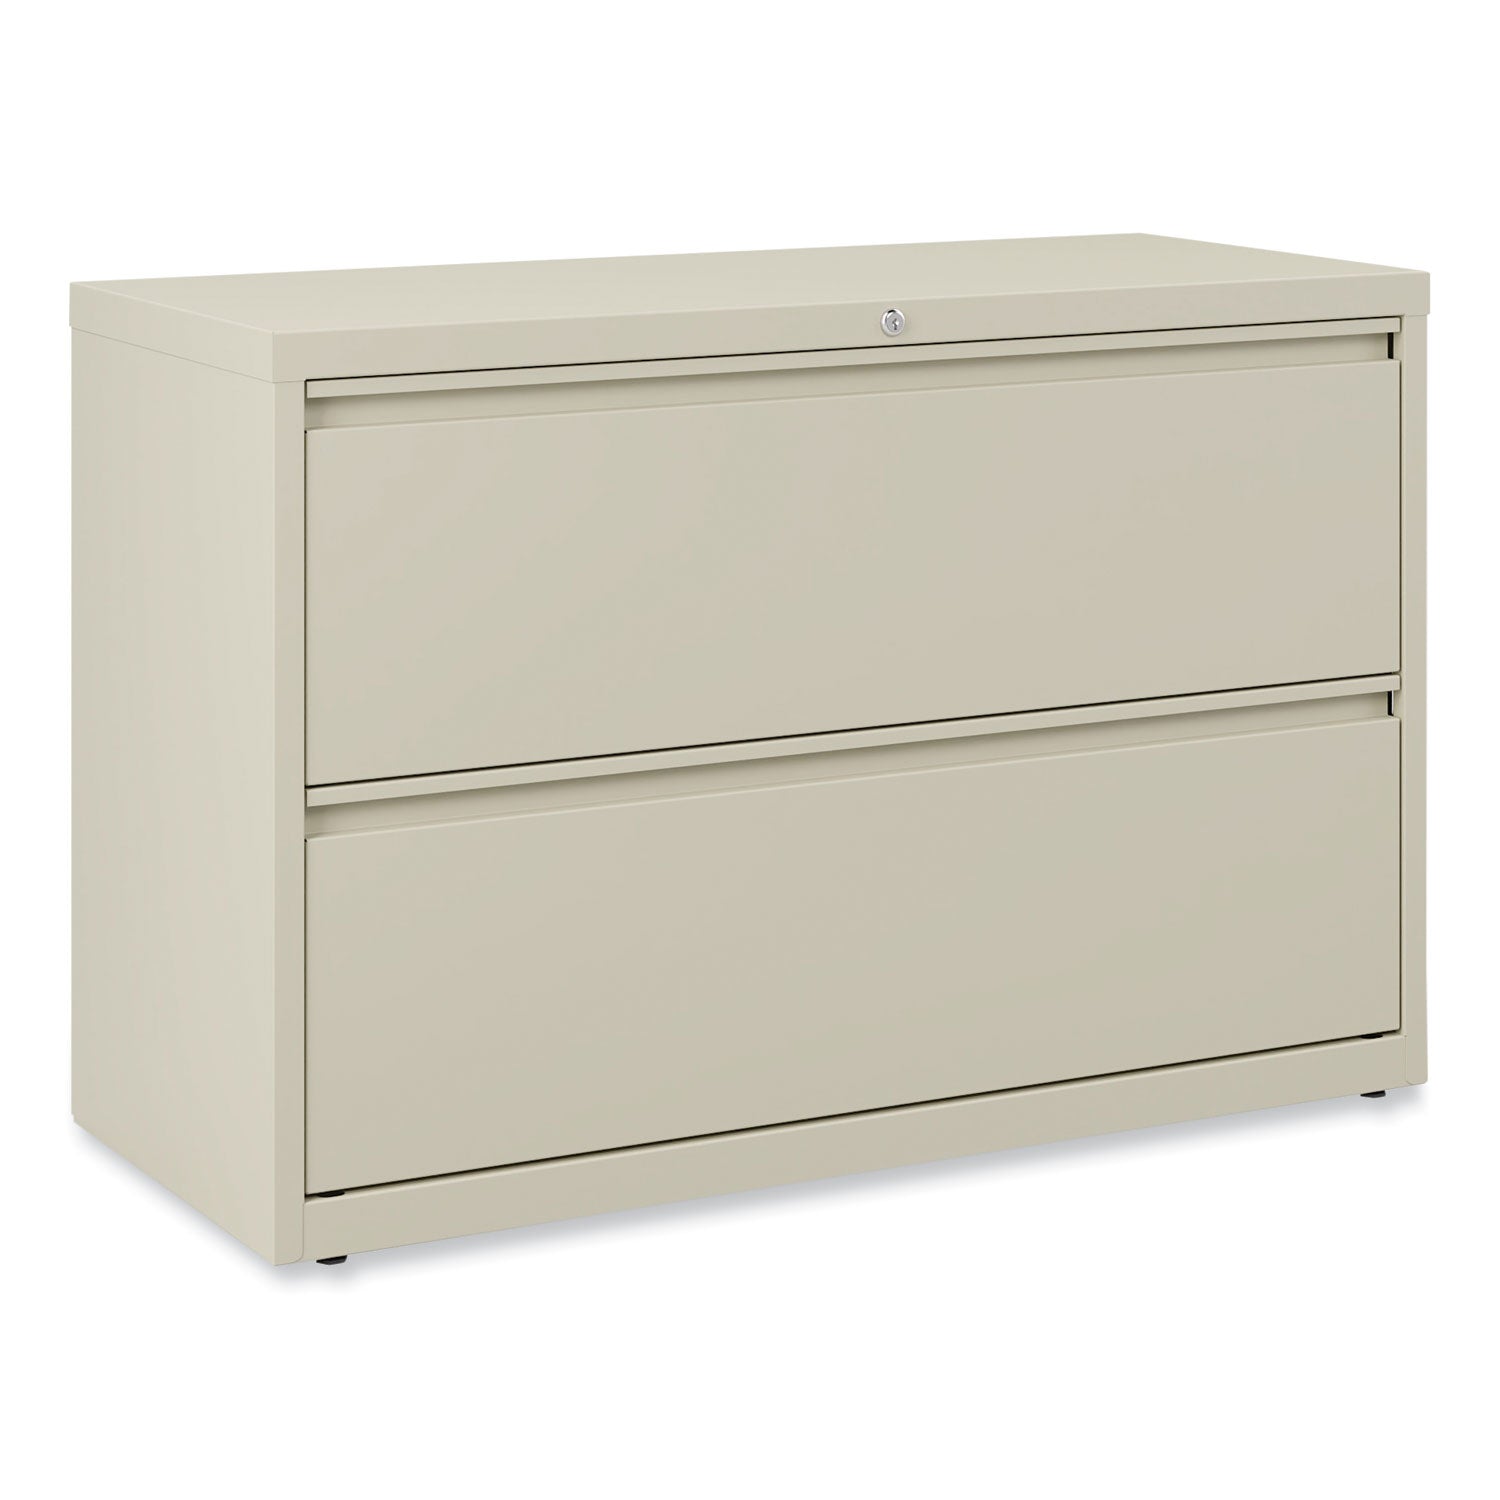 lateral-file-2-legal-letter-size-file-drawers-putty-42-x-1863-x-28_alehlf4229py - 1